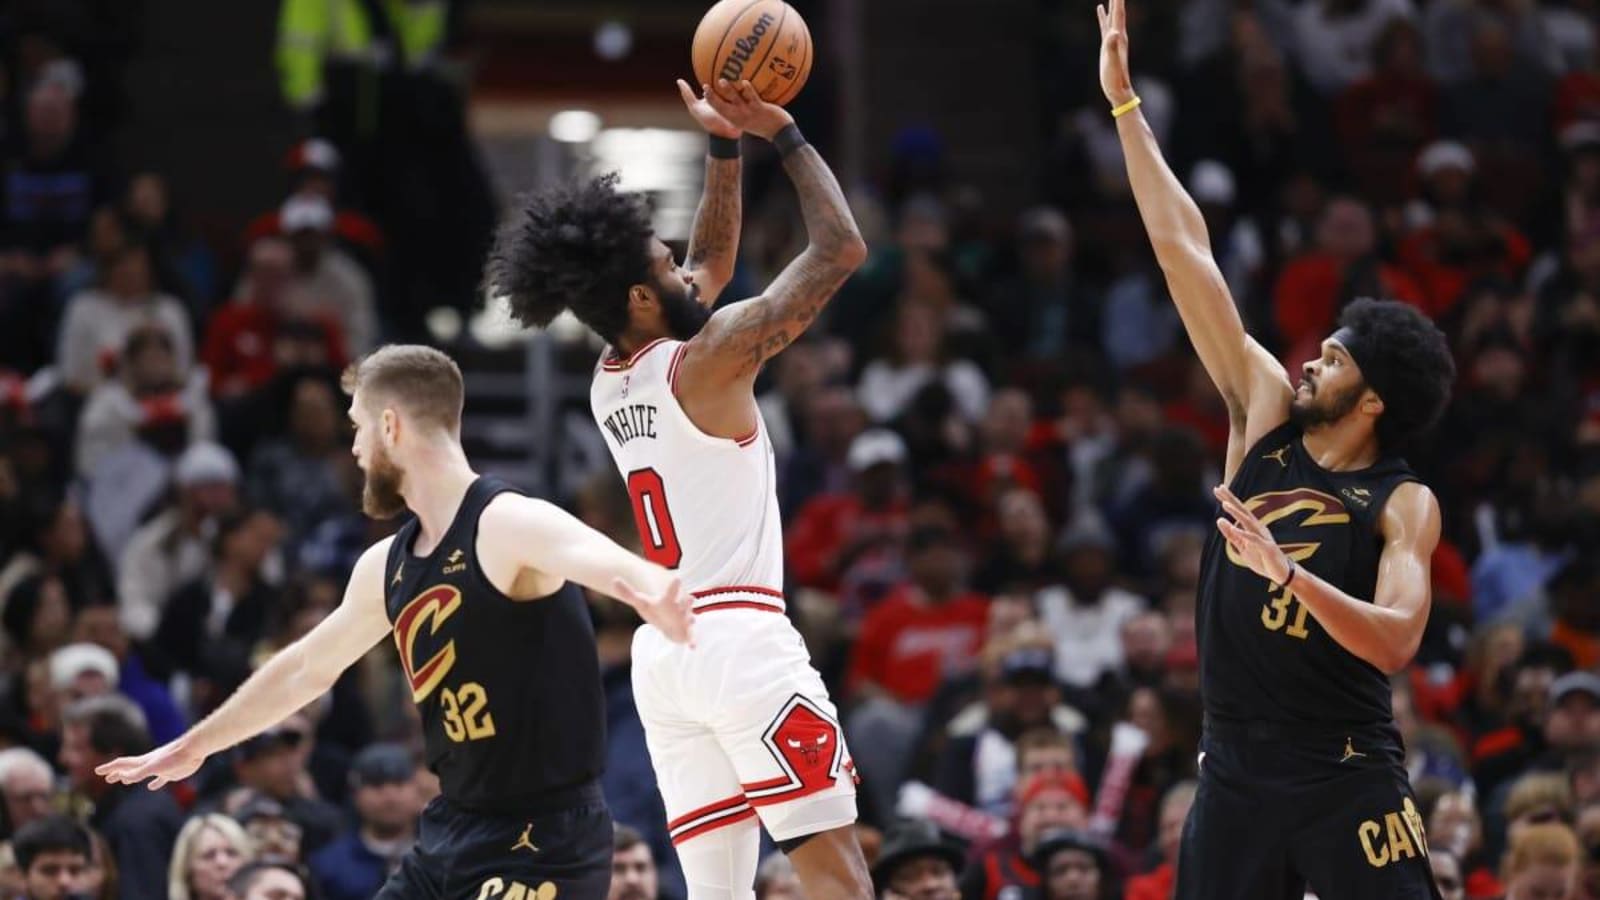 The Chicago Bulls were defeated by the weakened Cleveland Cavaliers